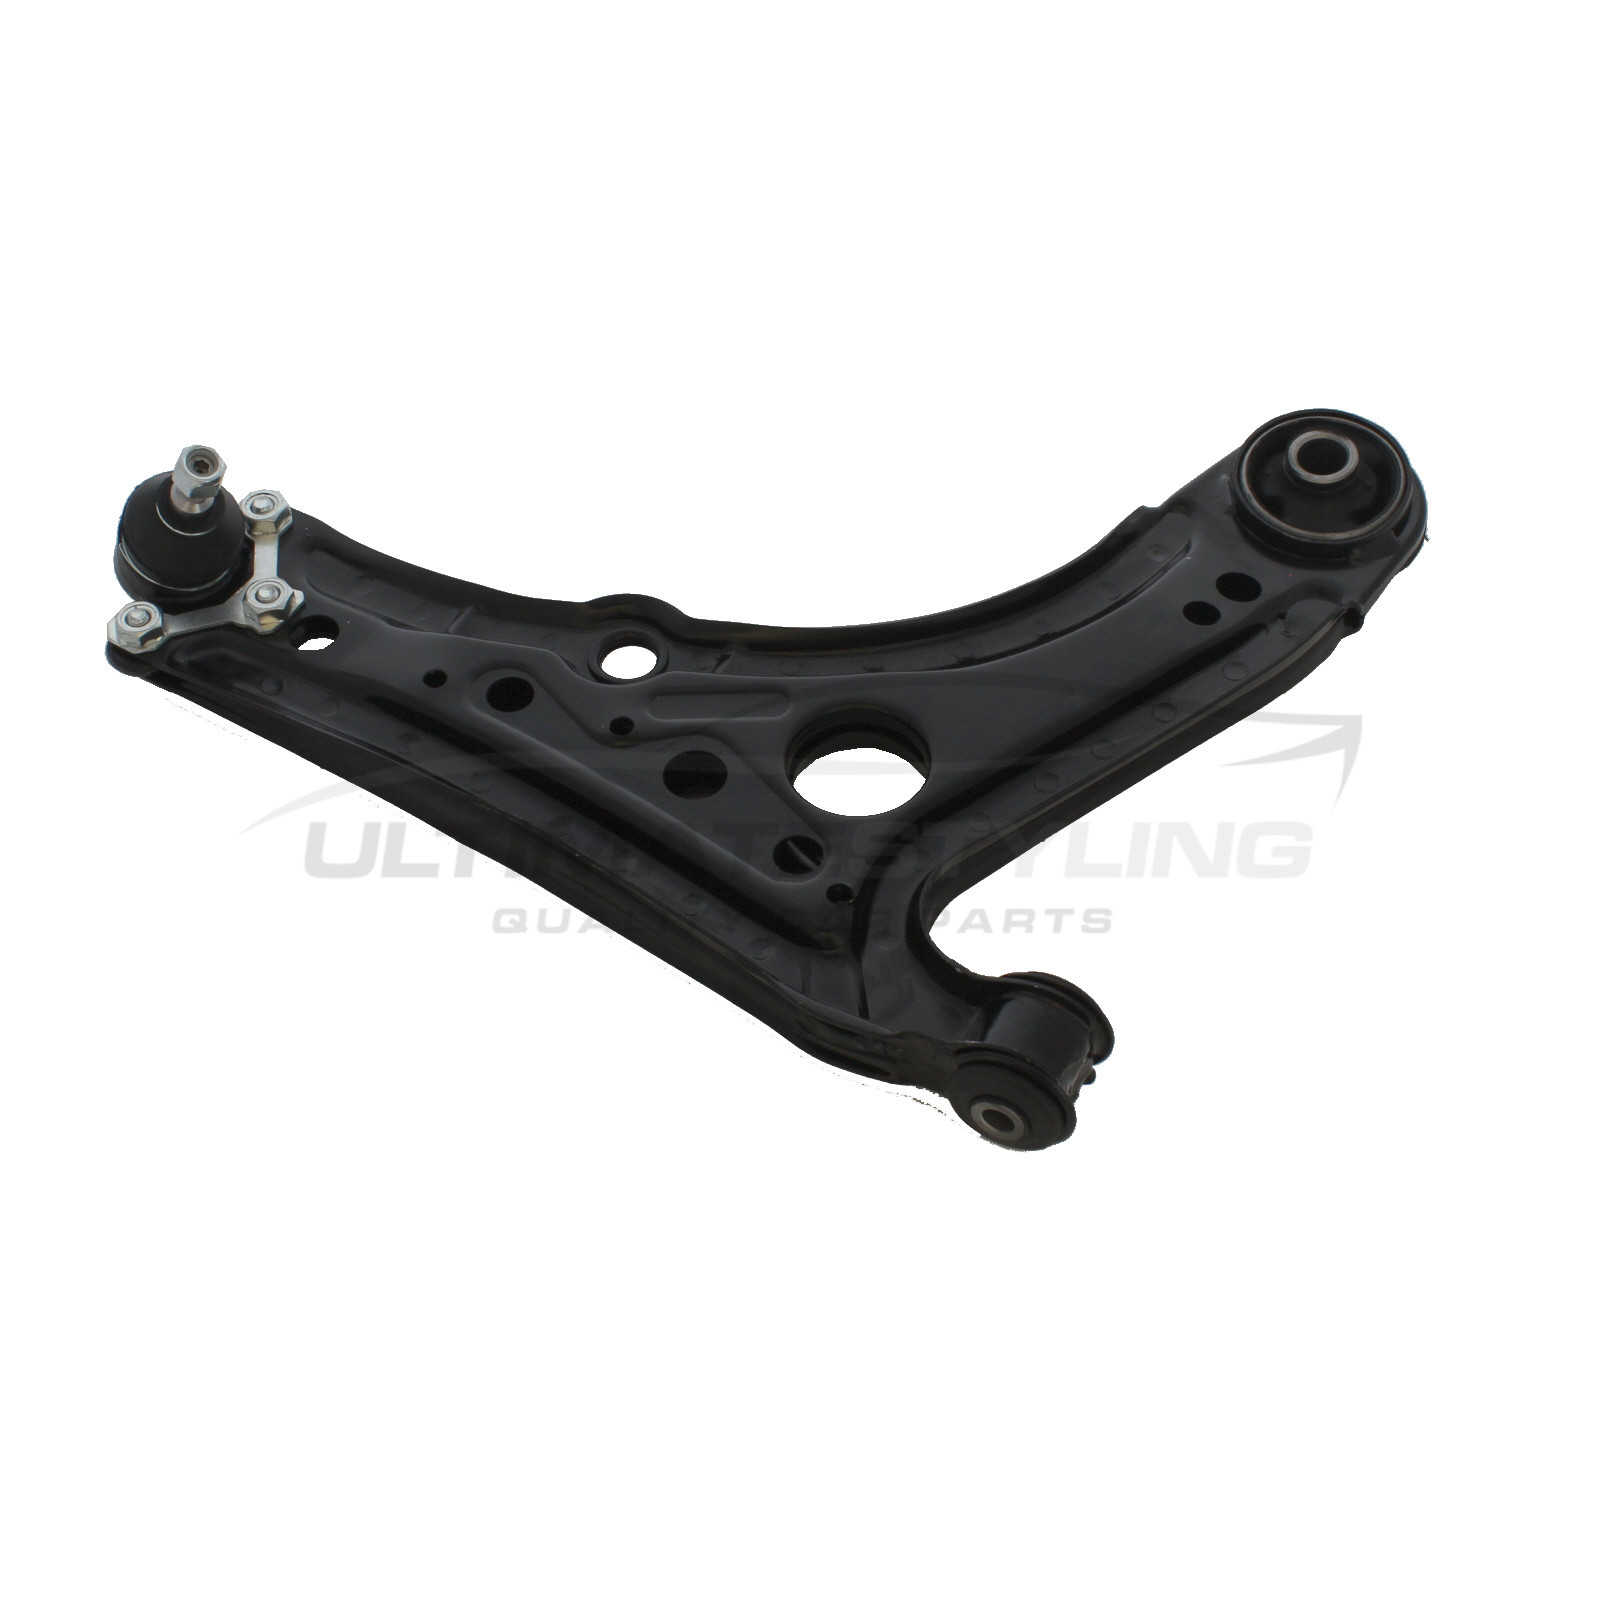 Suspension Arm for VW Lupo